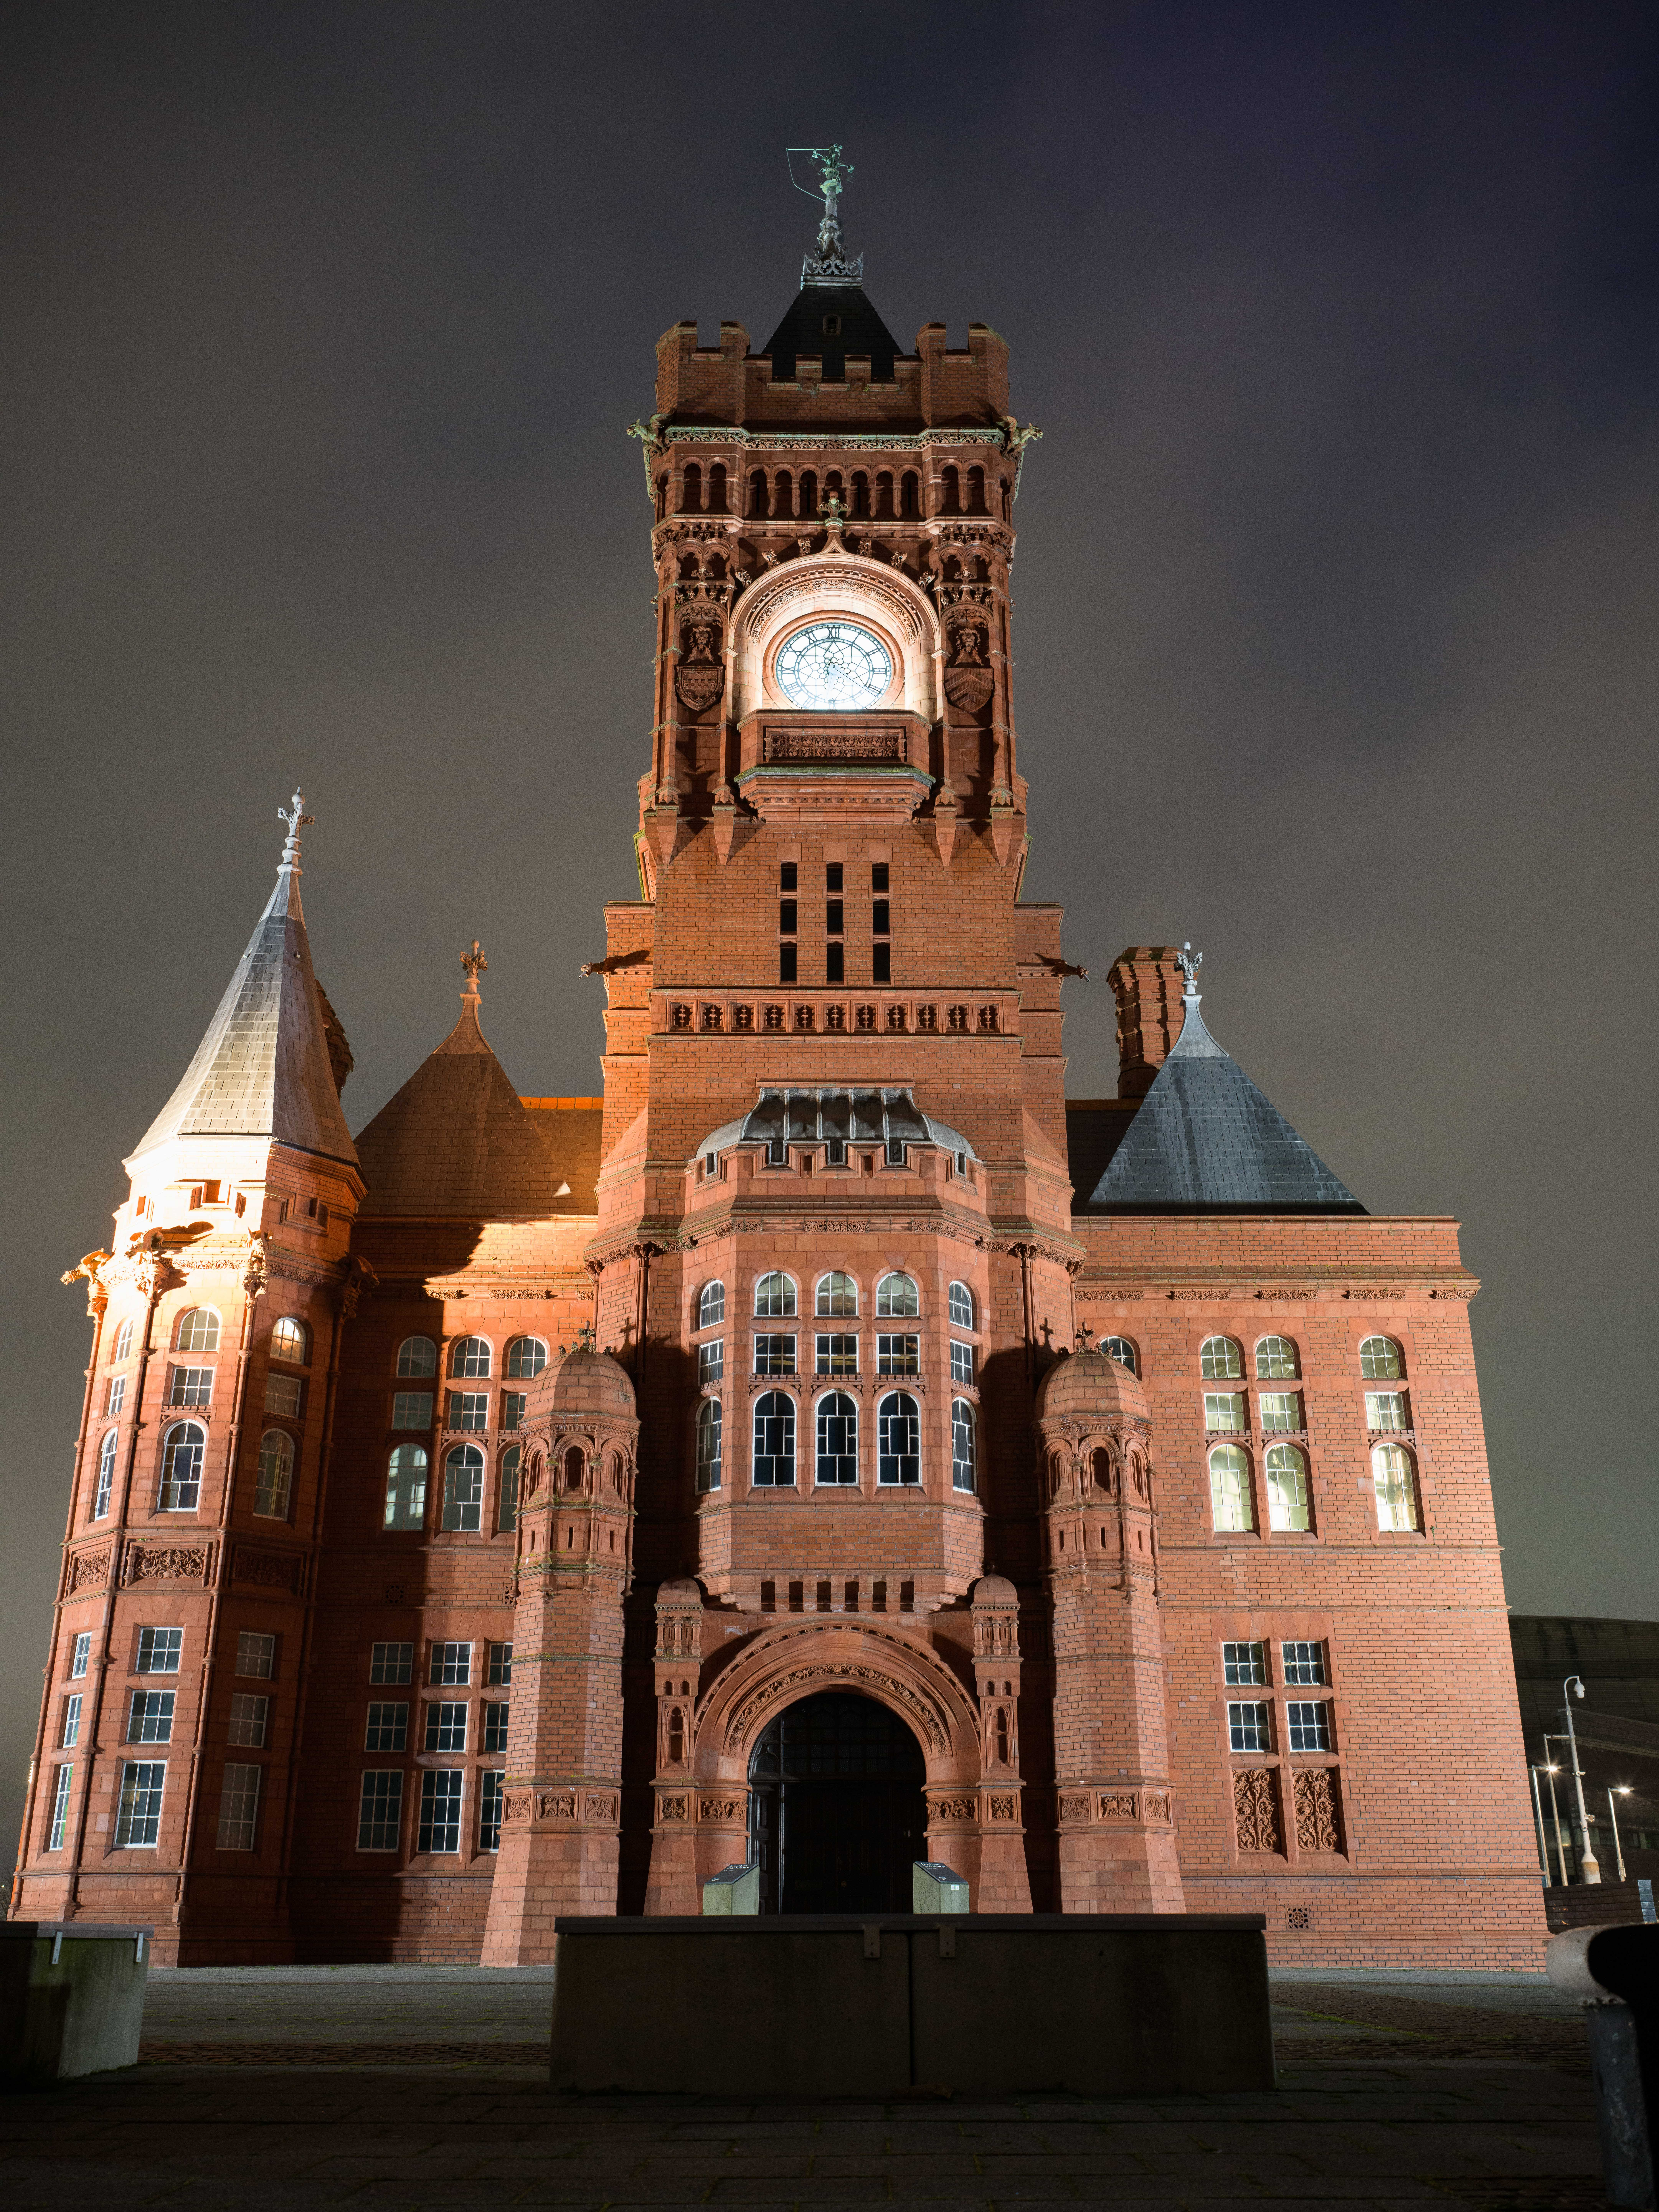 A photograph of the Cardiff Pierhead building, taken at night.